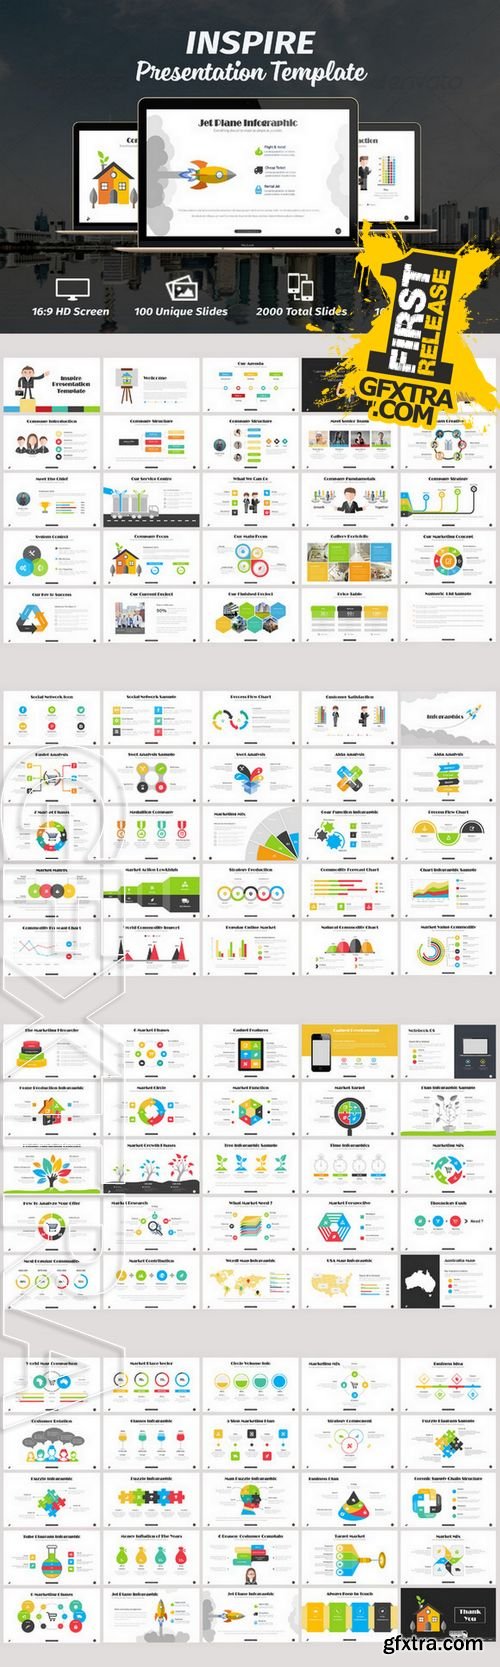 Inspire Powerpoint Template - CM 287472